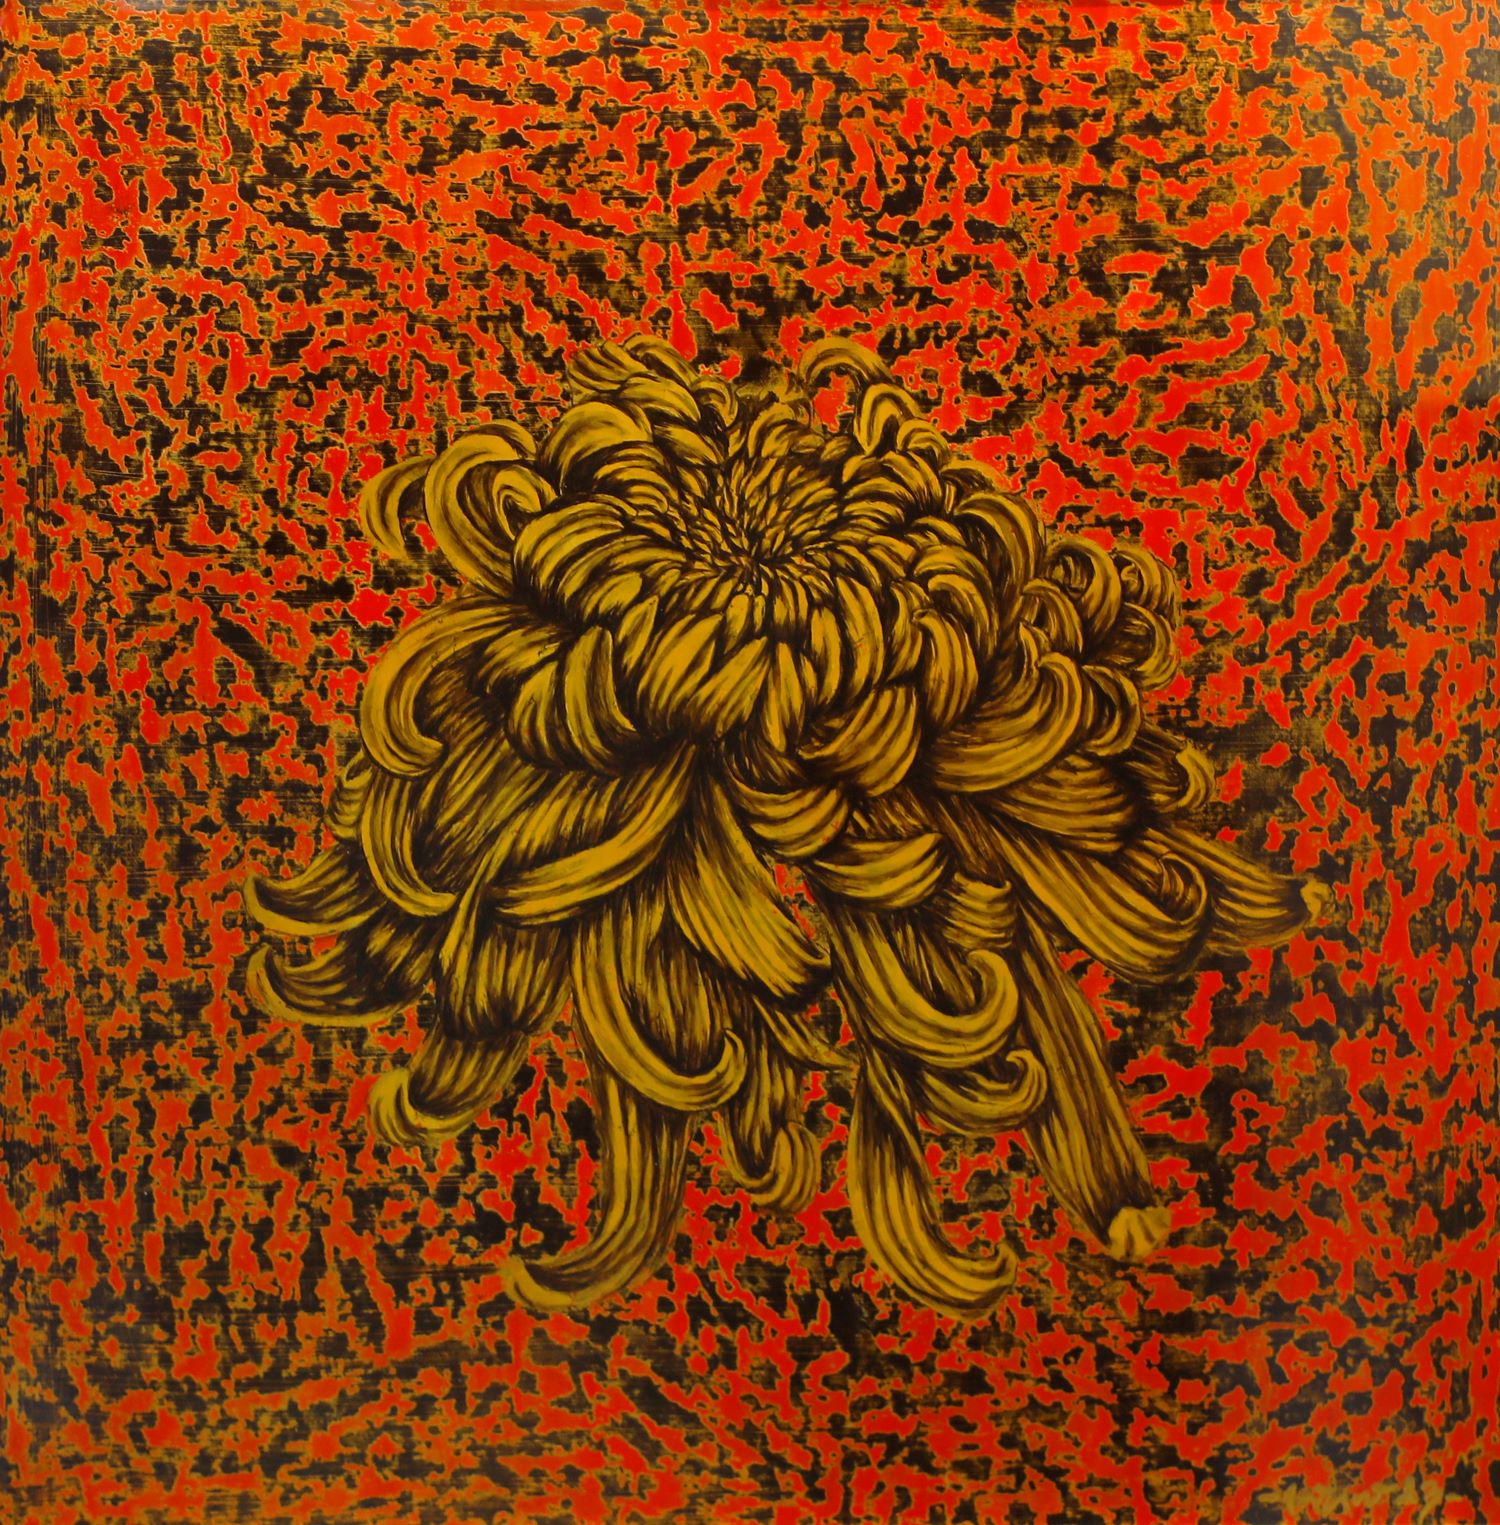 golden daisy - vietnamese lacquer painting by artist nam thanh trung